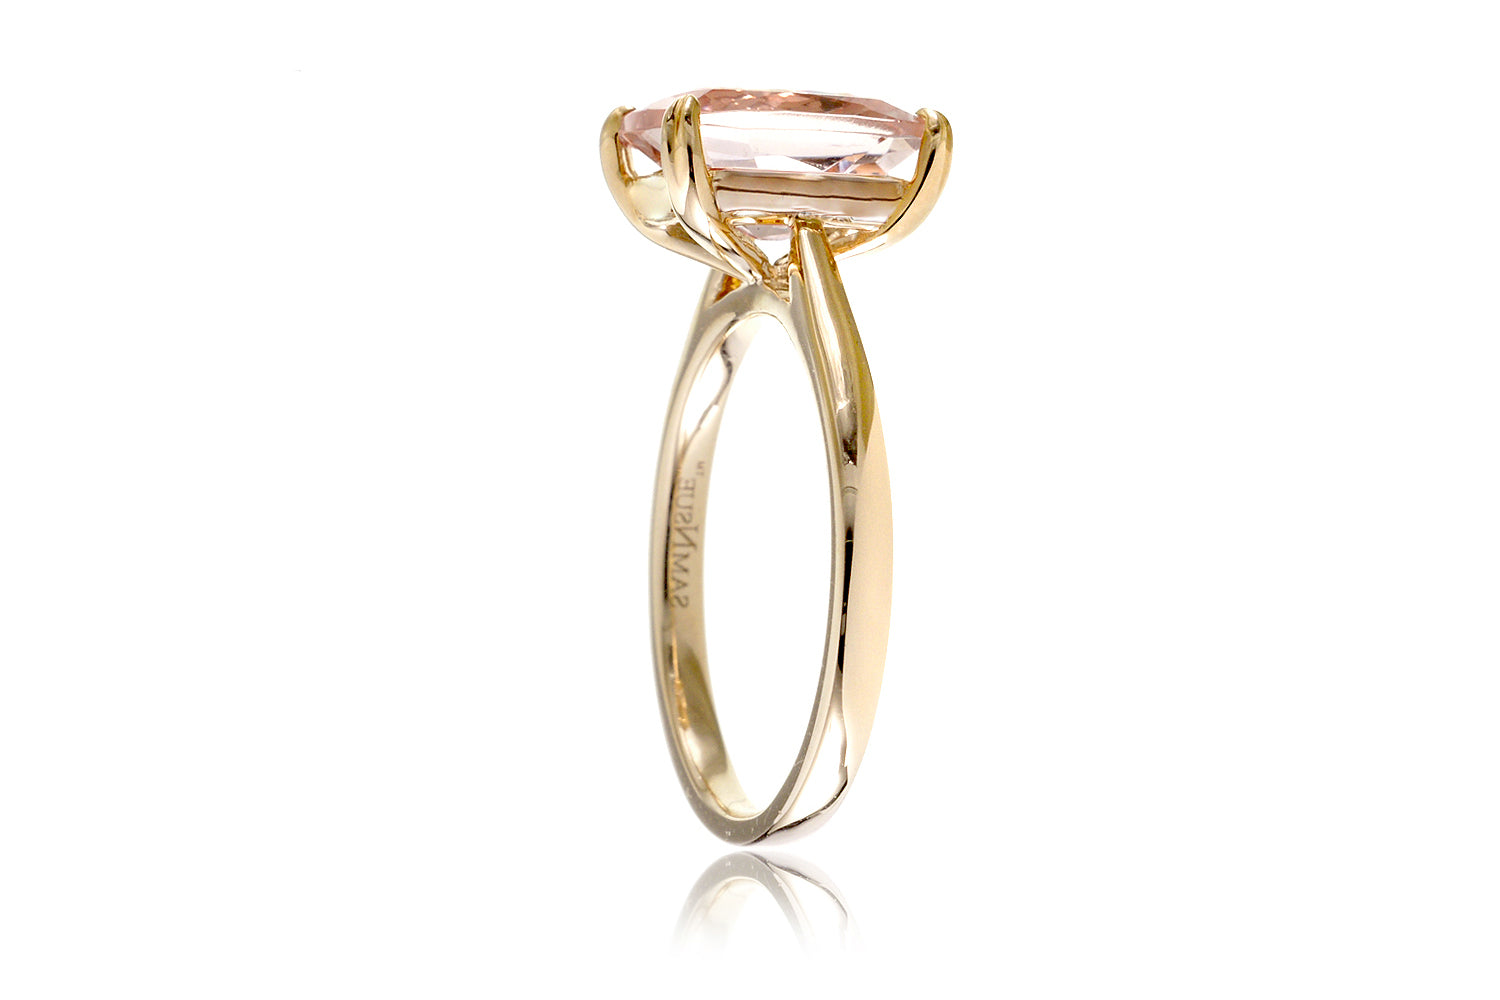 The Emily Oval Morganite